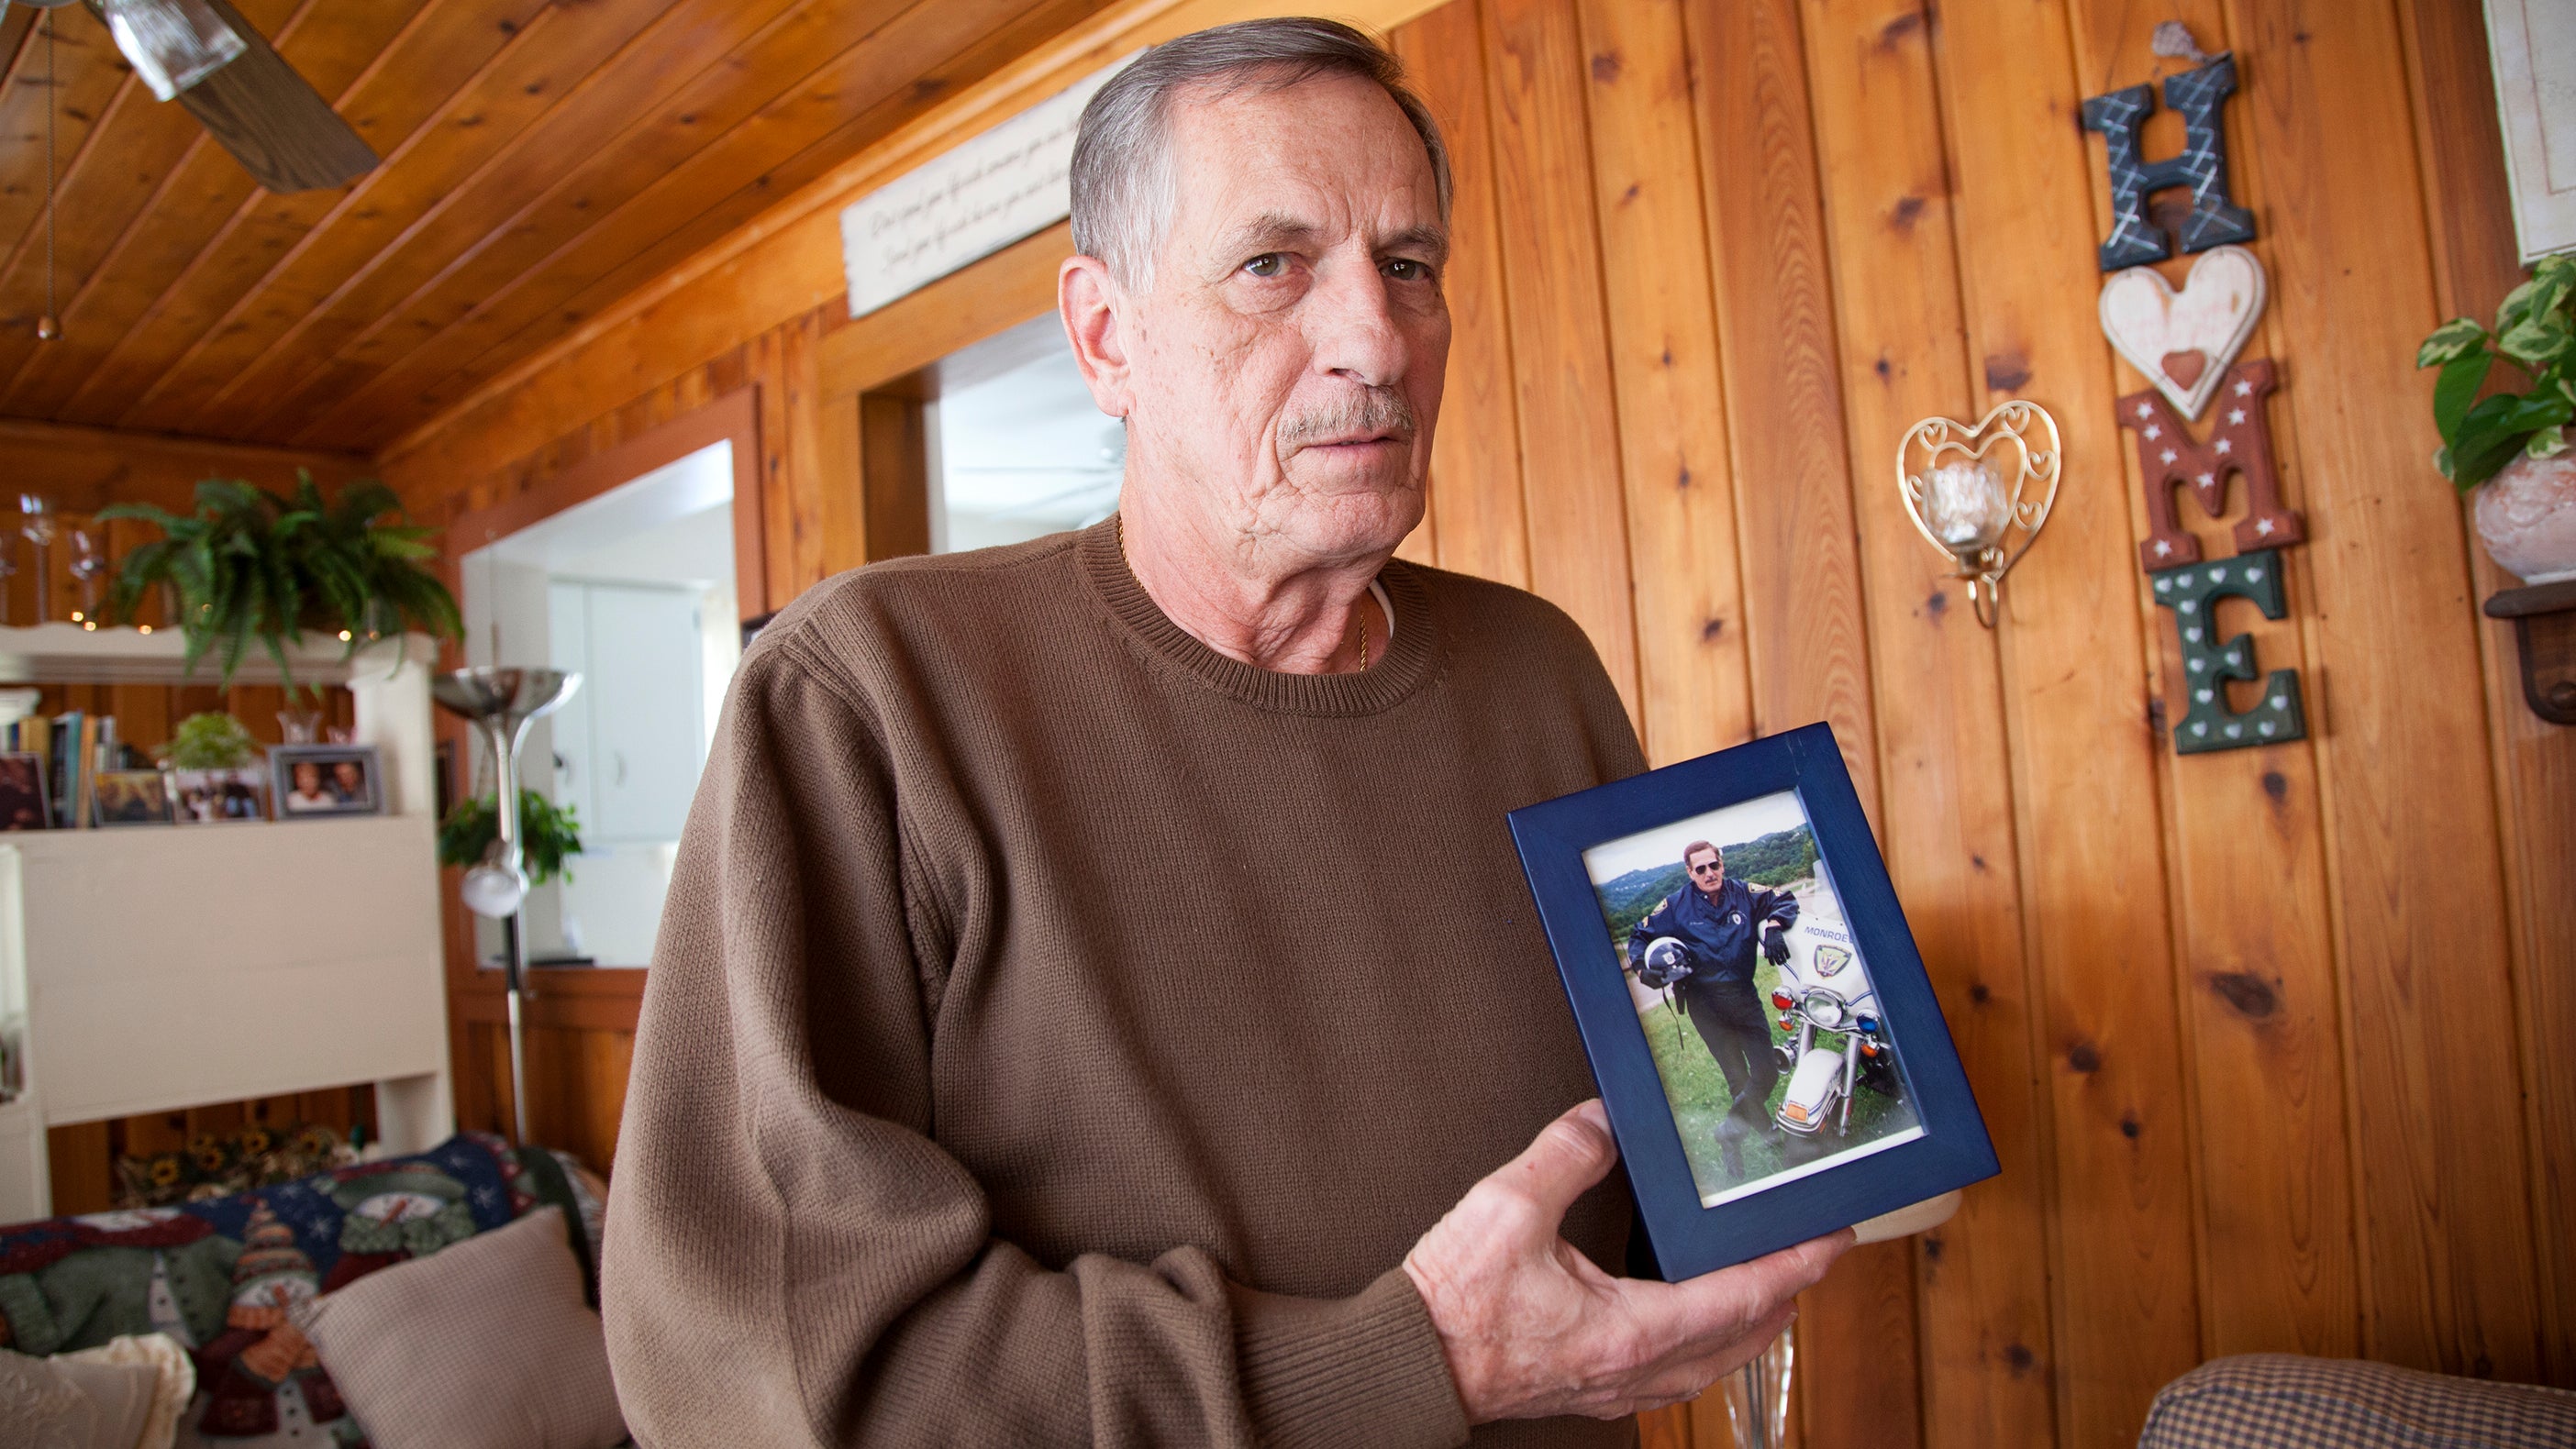  Joe Rosipal, 70, a retired Monroeville police officer, with a photograph of himself in his 40s, when he was part of the motorcycle division. (Irina Zhorov/WESA) 